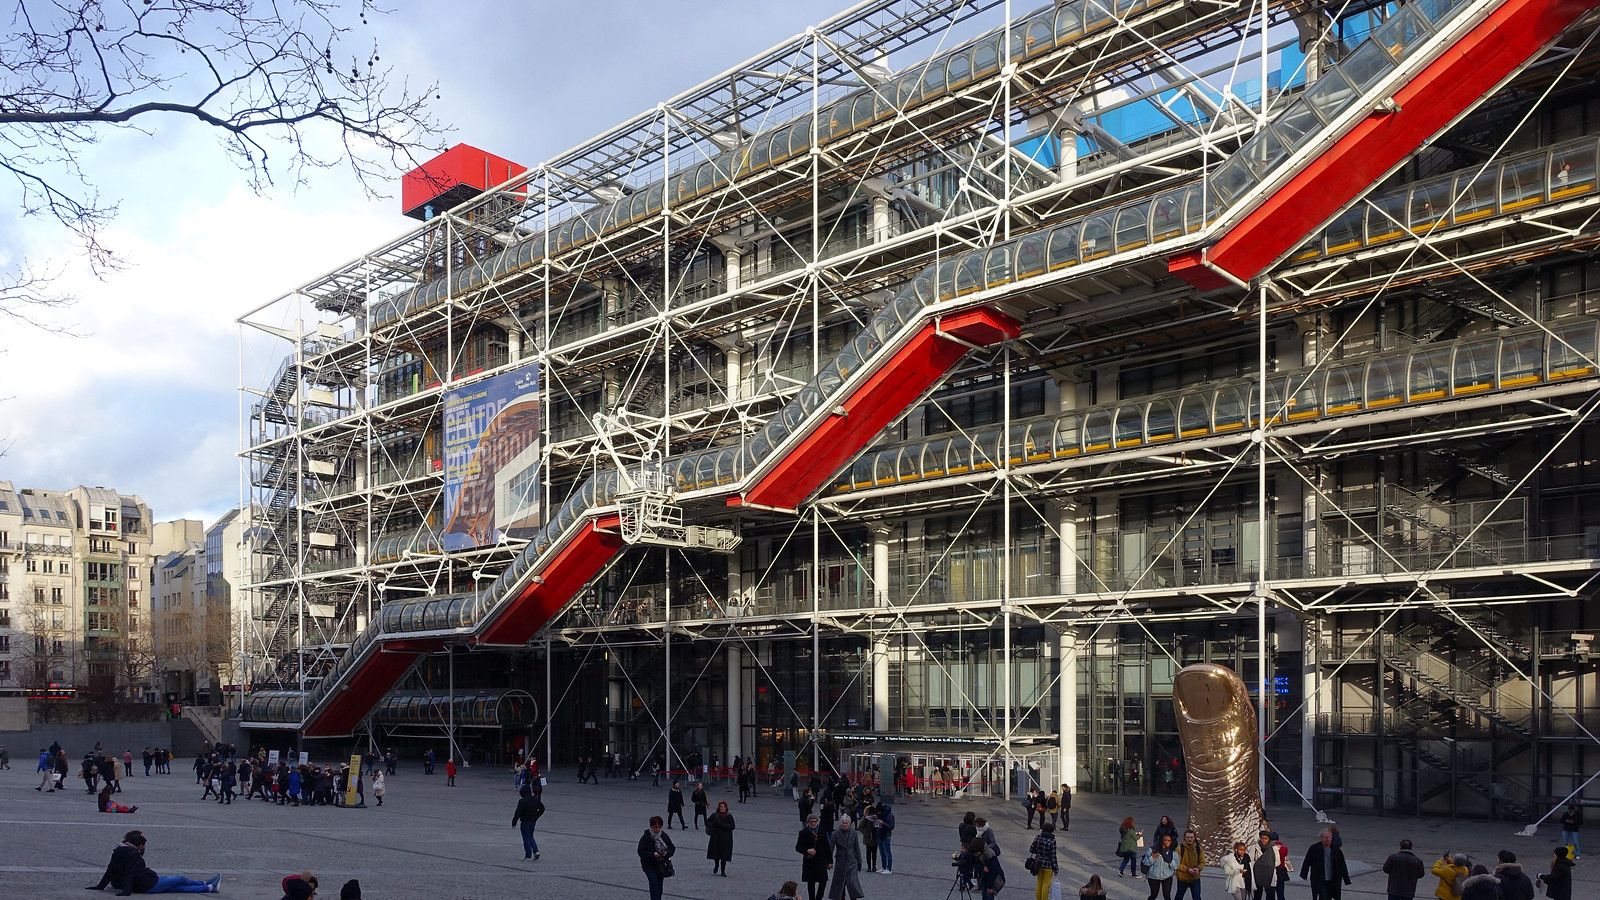 Centre Pompidou By Renzo Piano And Richard Rogers (1971)